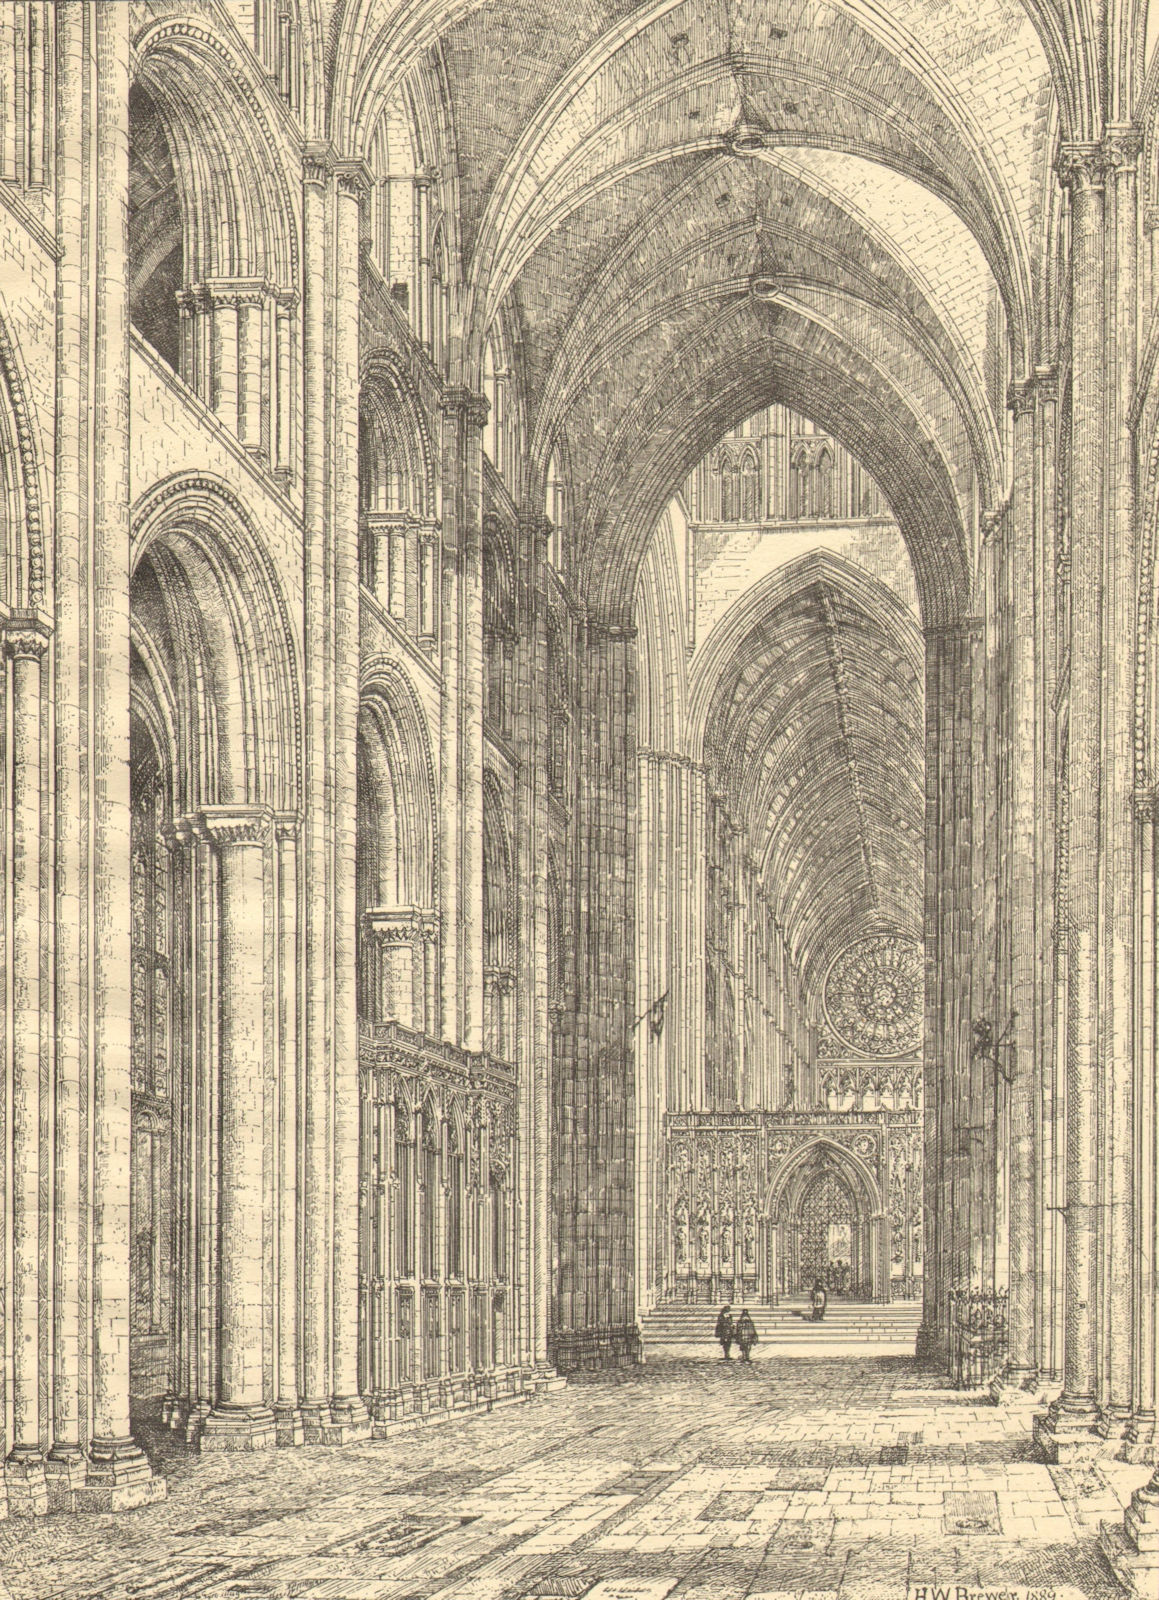 MEDIEVAL LONDON. Old St. Paul's Cathedral. The nave and east end 1923 print